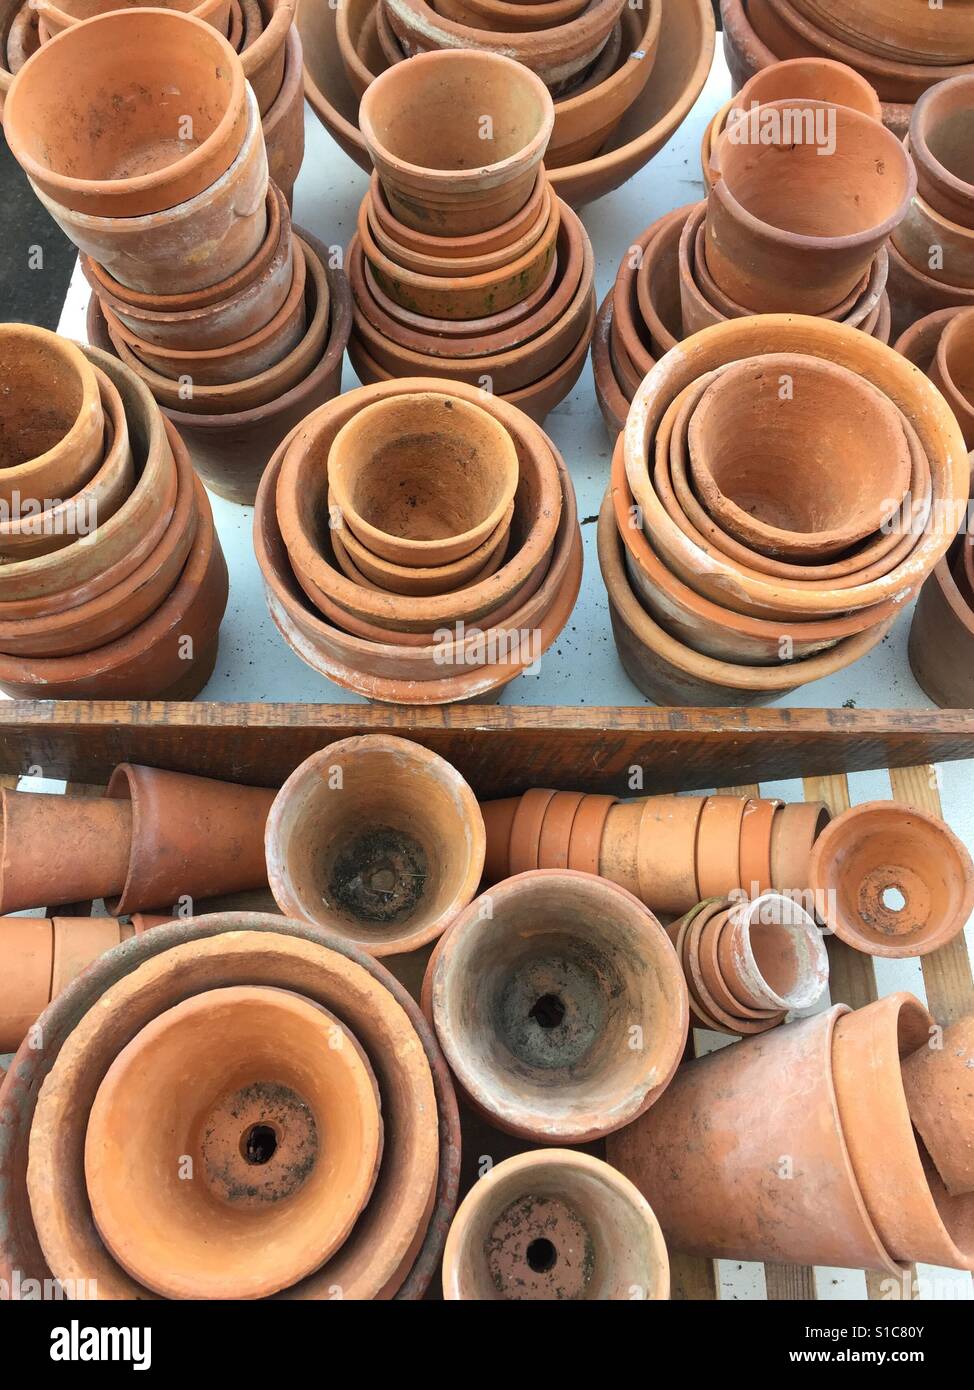 Selection of vintage terracotta gardening pots for sale in a market stall, England Stock Photo